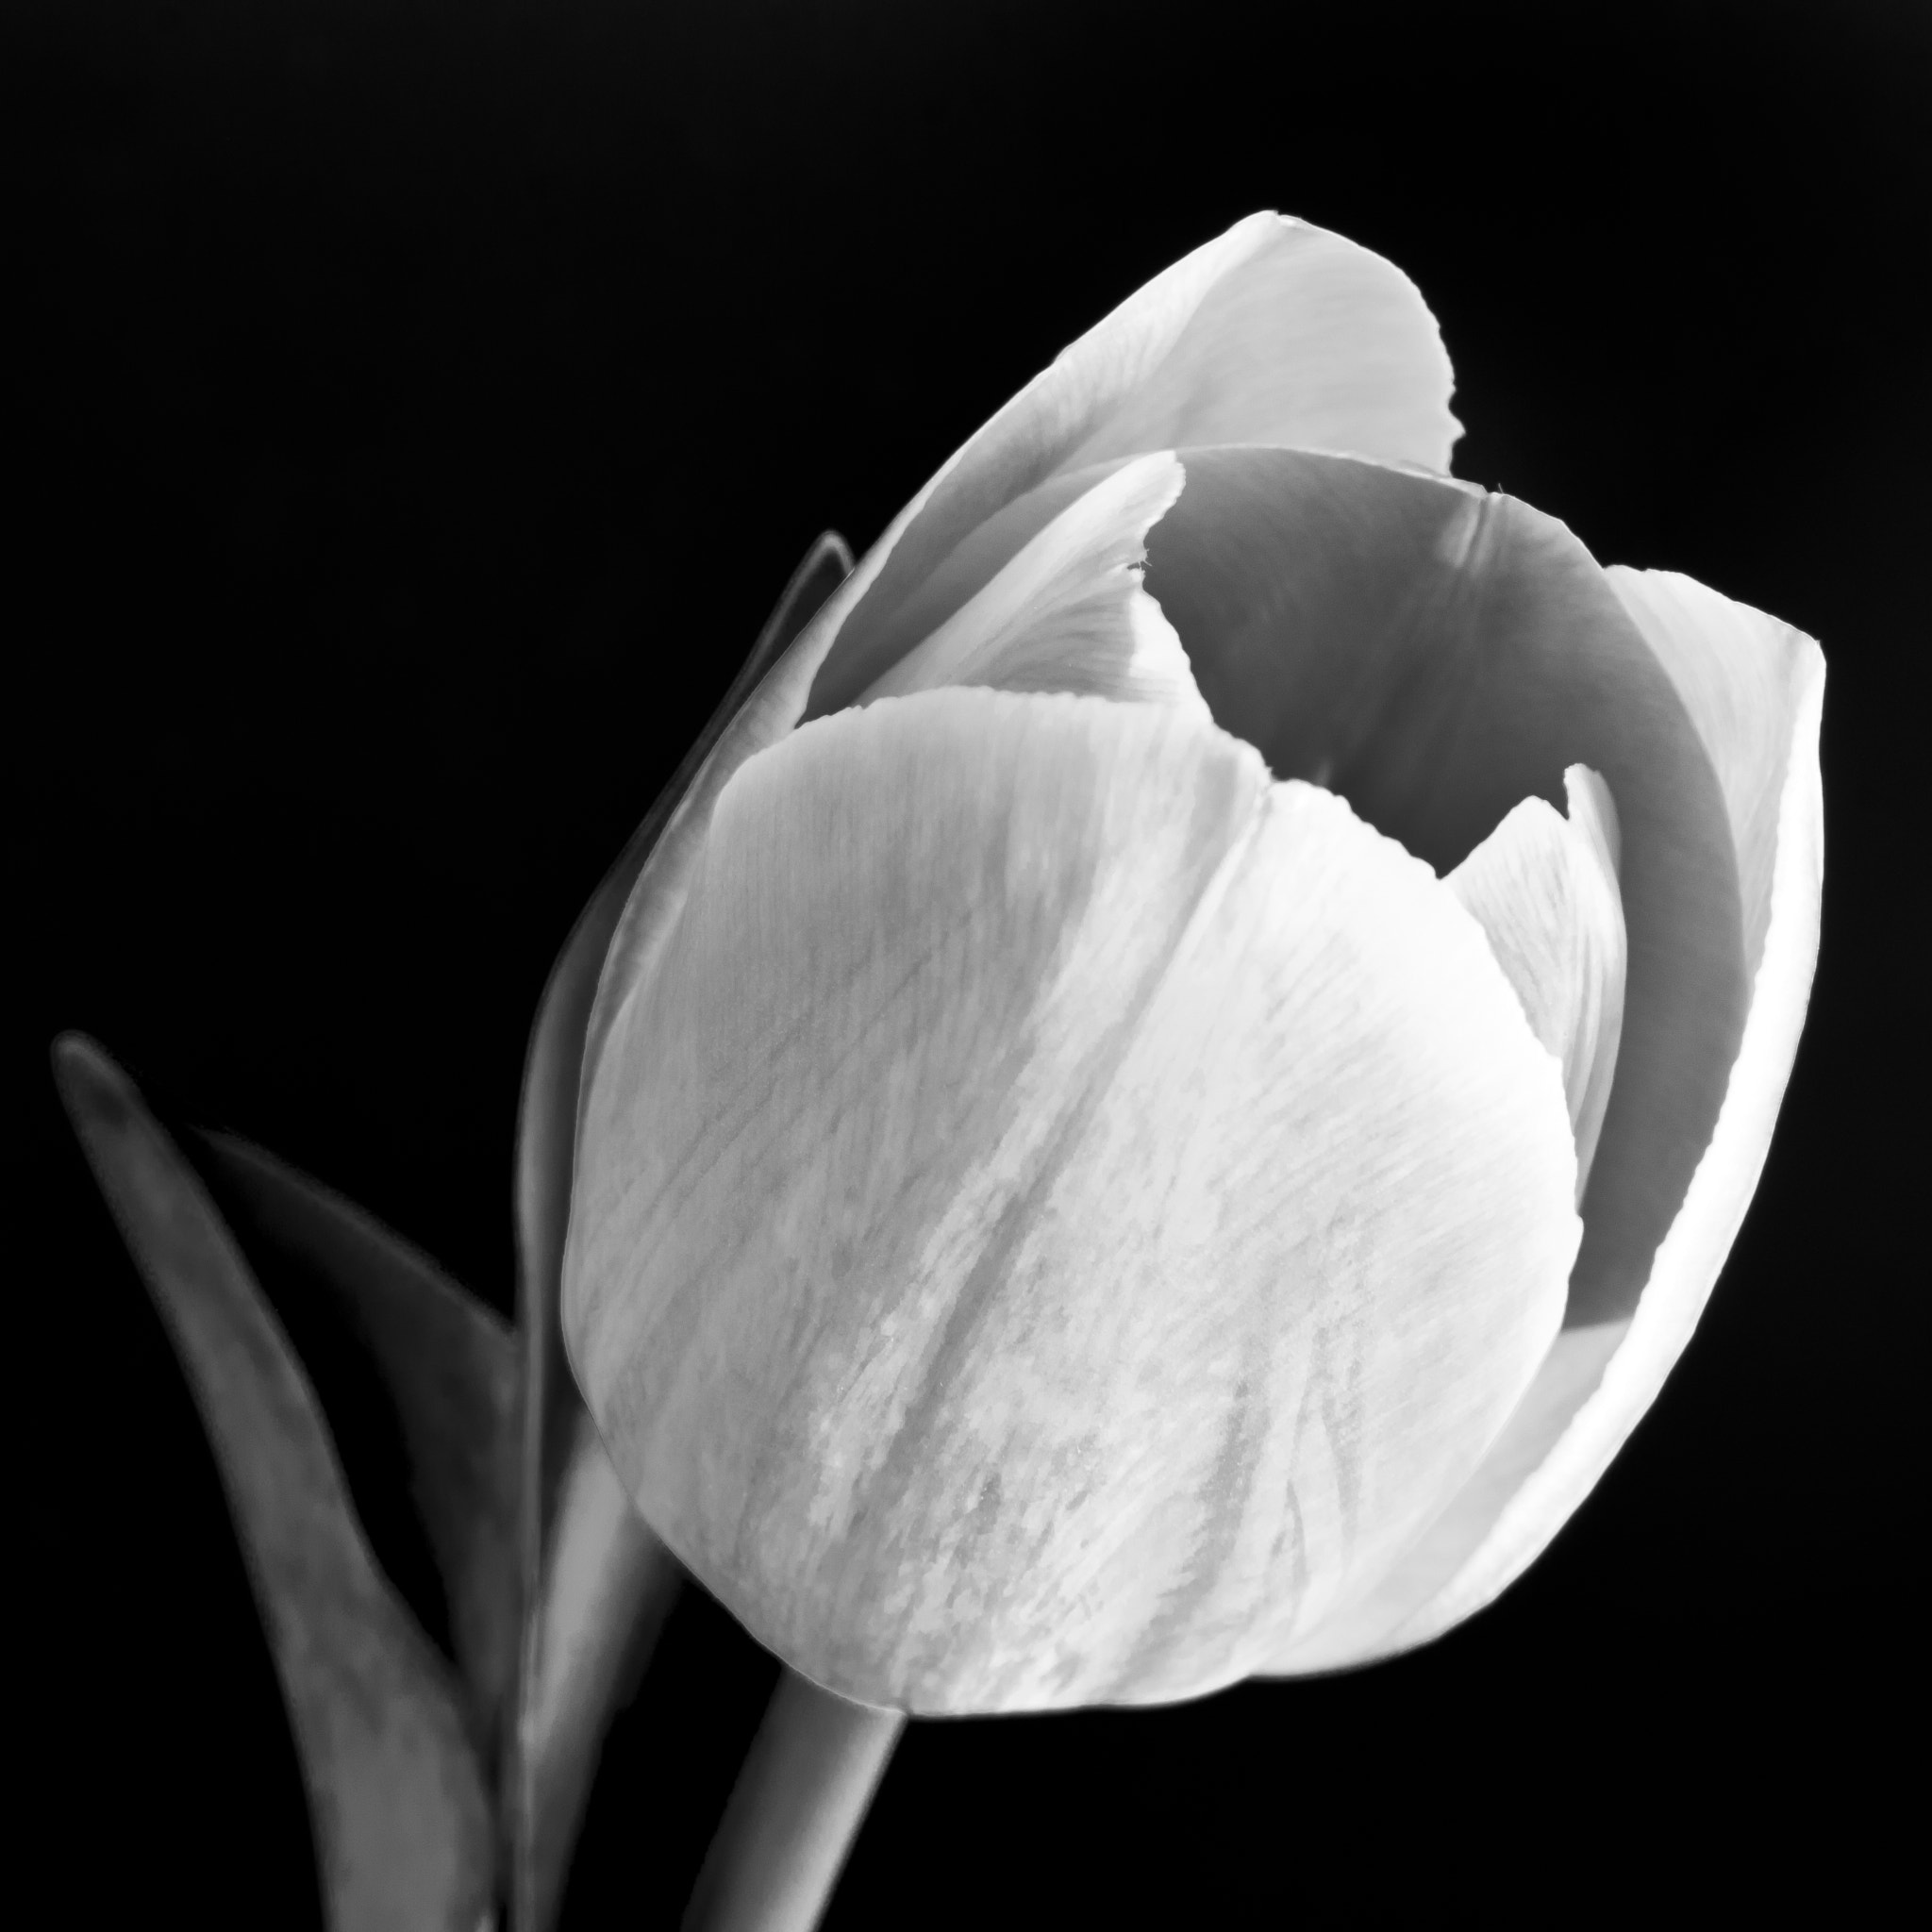 Nikon D3100 + AF Zoom-Nikkor 28-105mm f/3.5-4.5D IF sample photo. The tulip in b&w photography